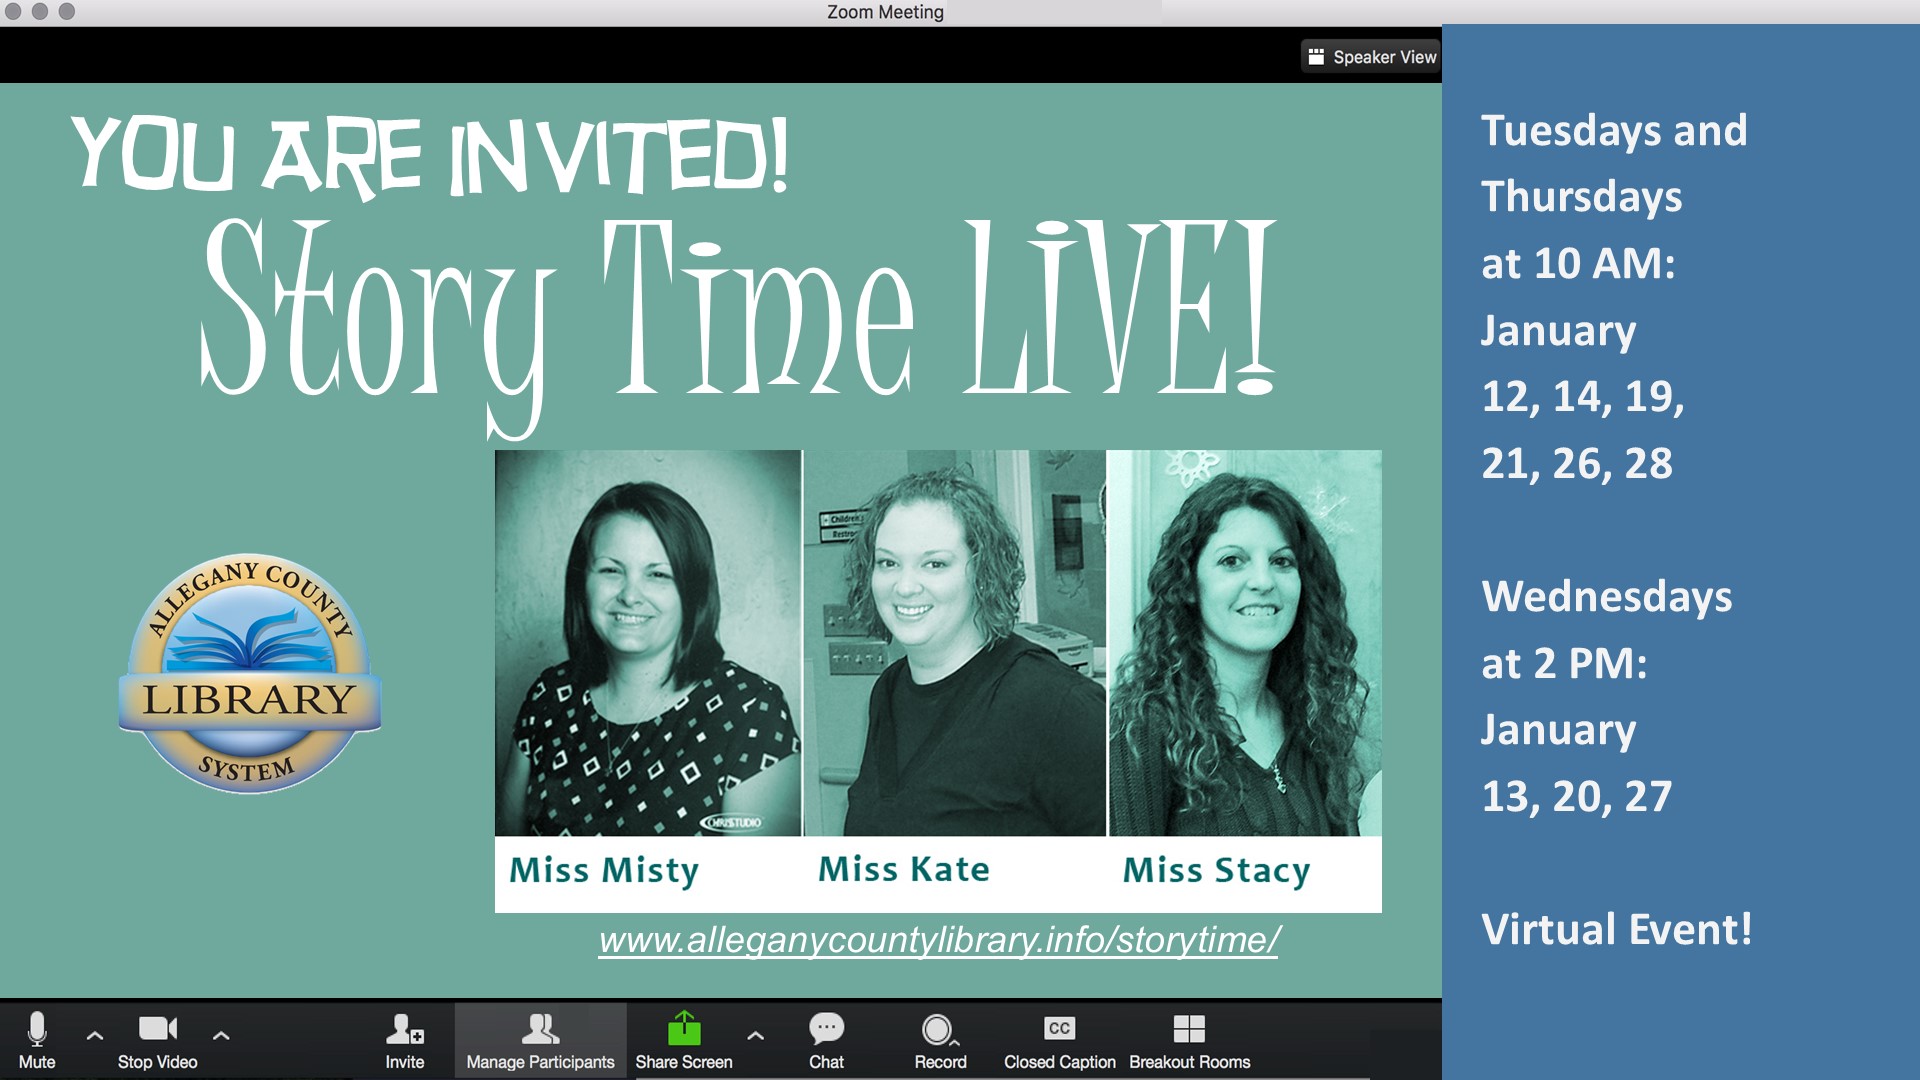 Story Time Live Image : photos of Misty, Kate, and Stacy and list of dates and times